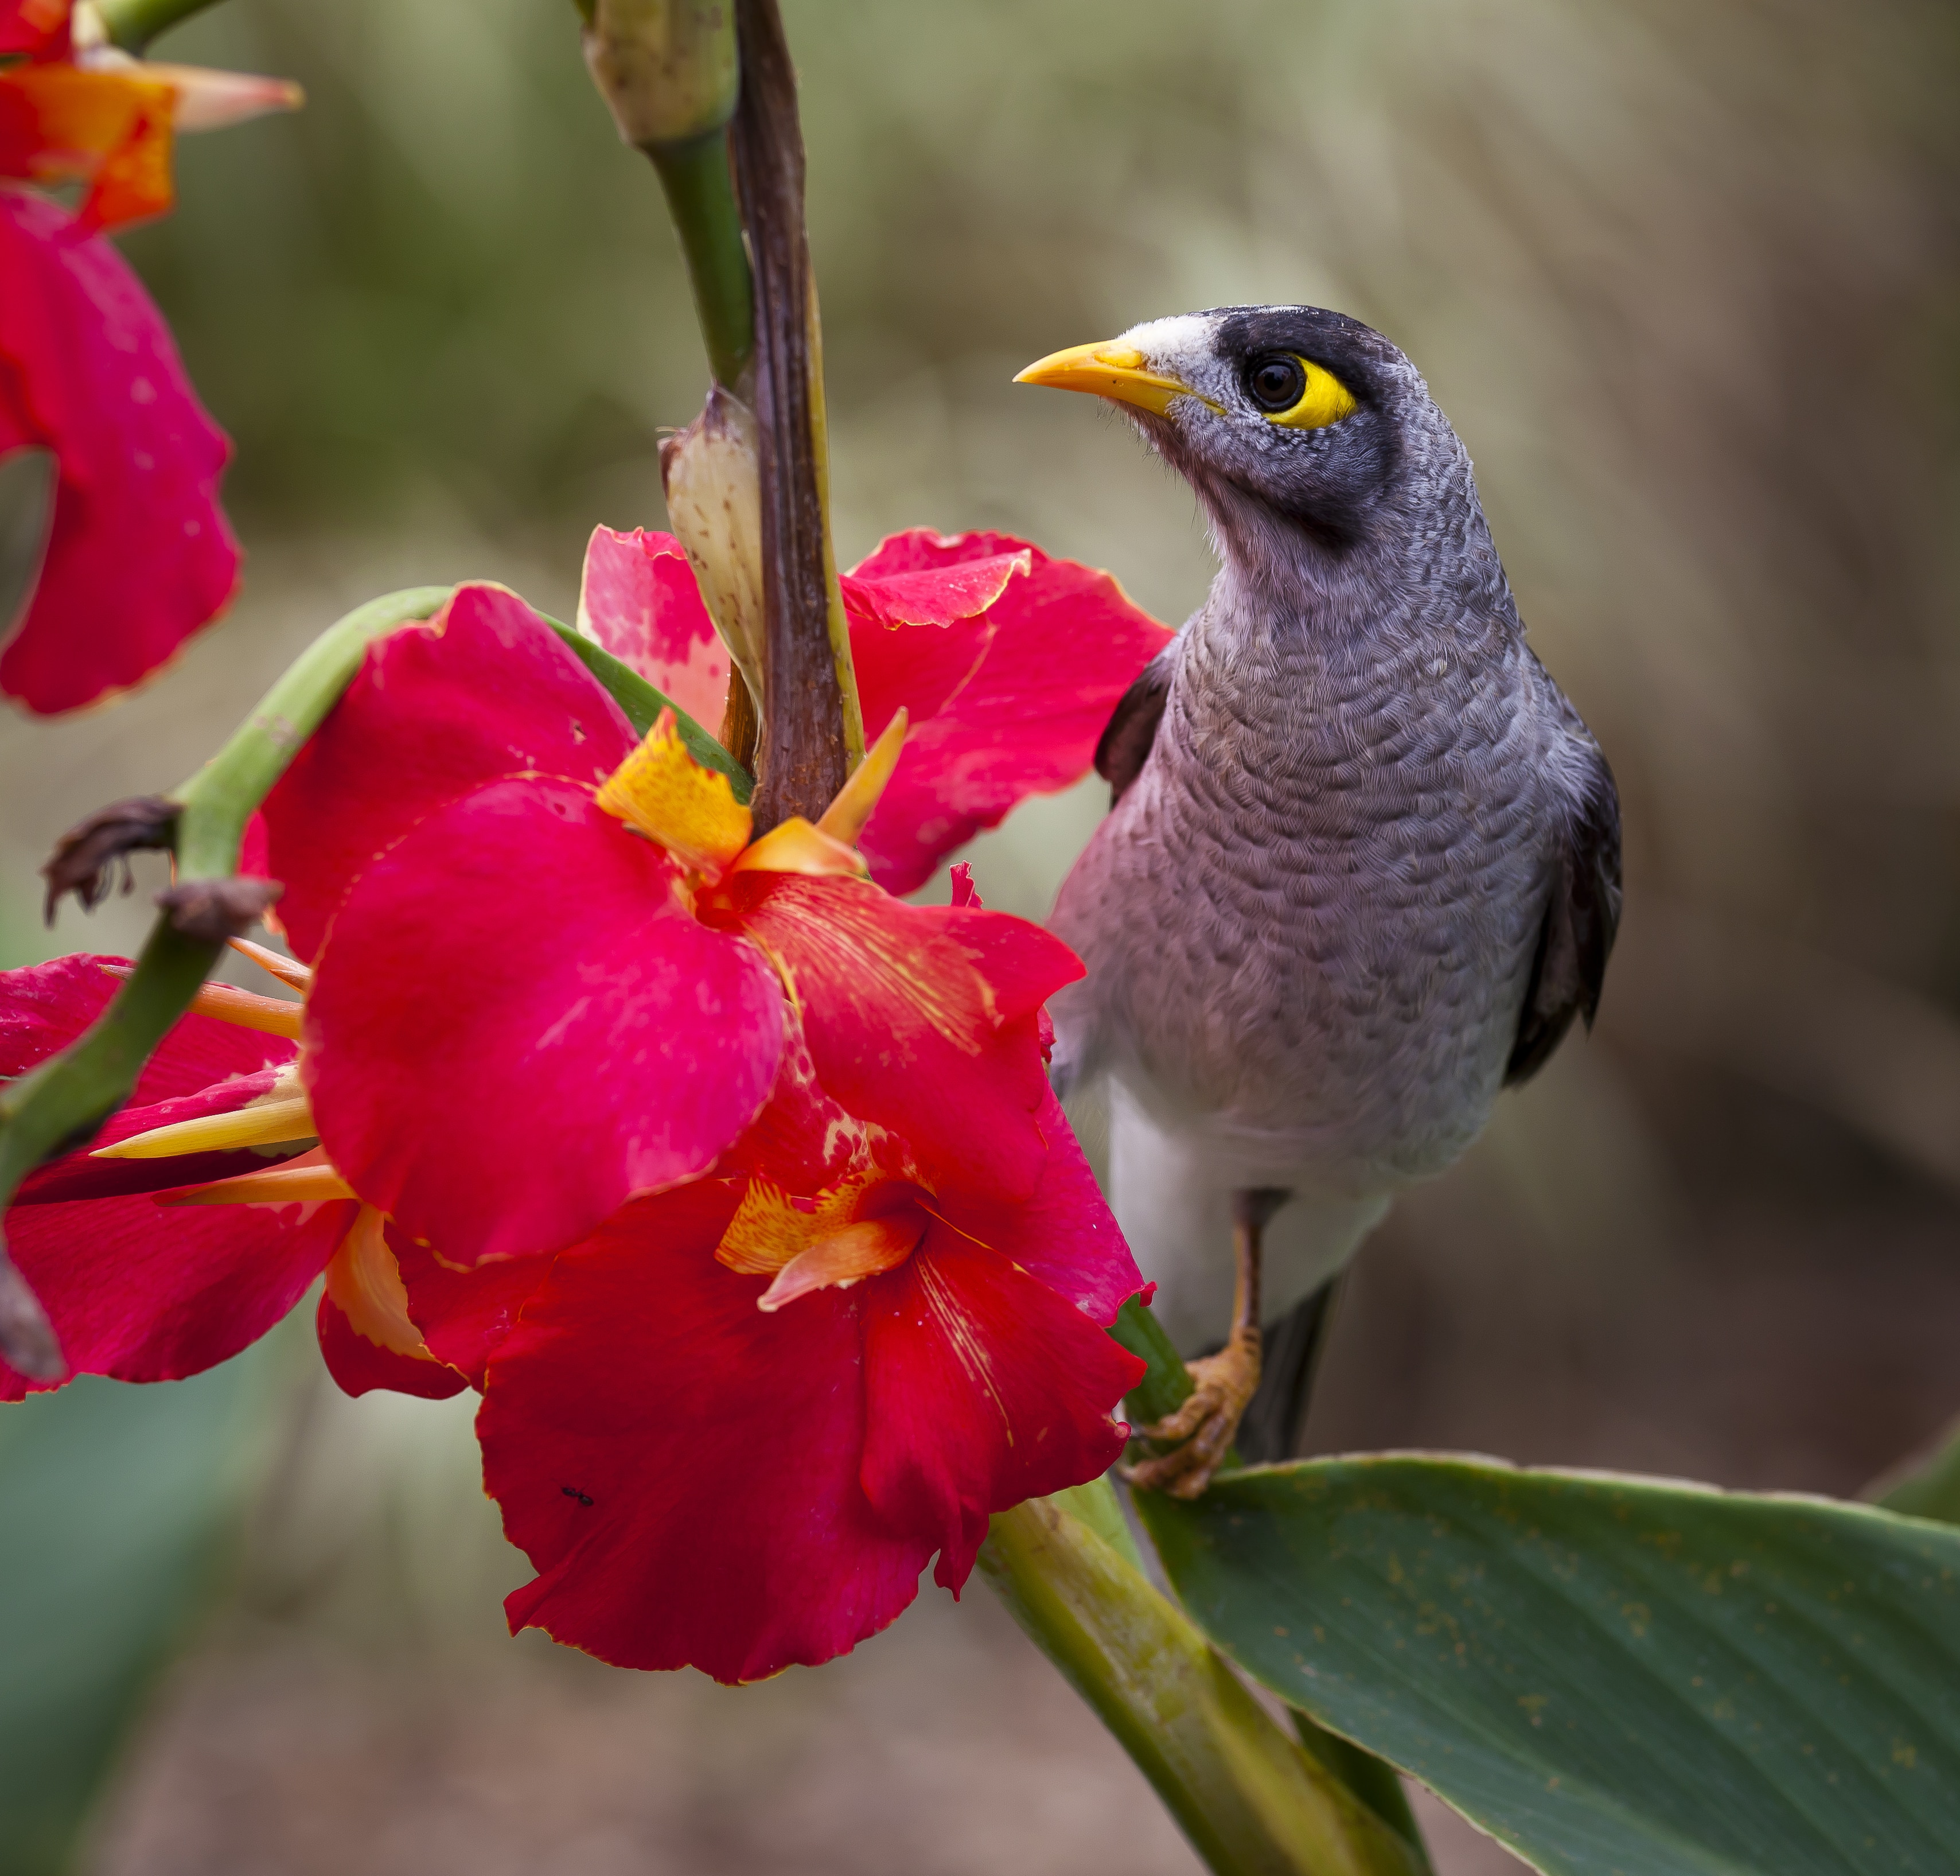 white black and gray bird on red flower